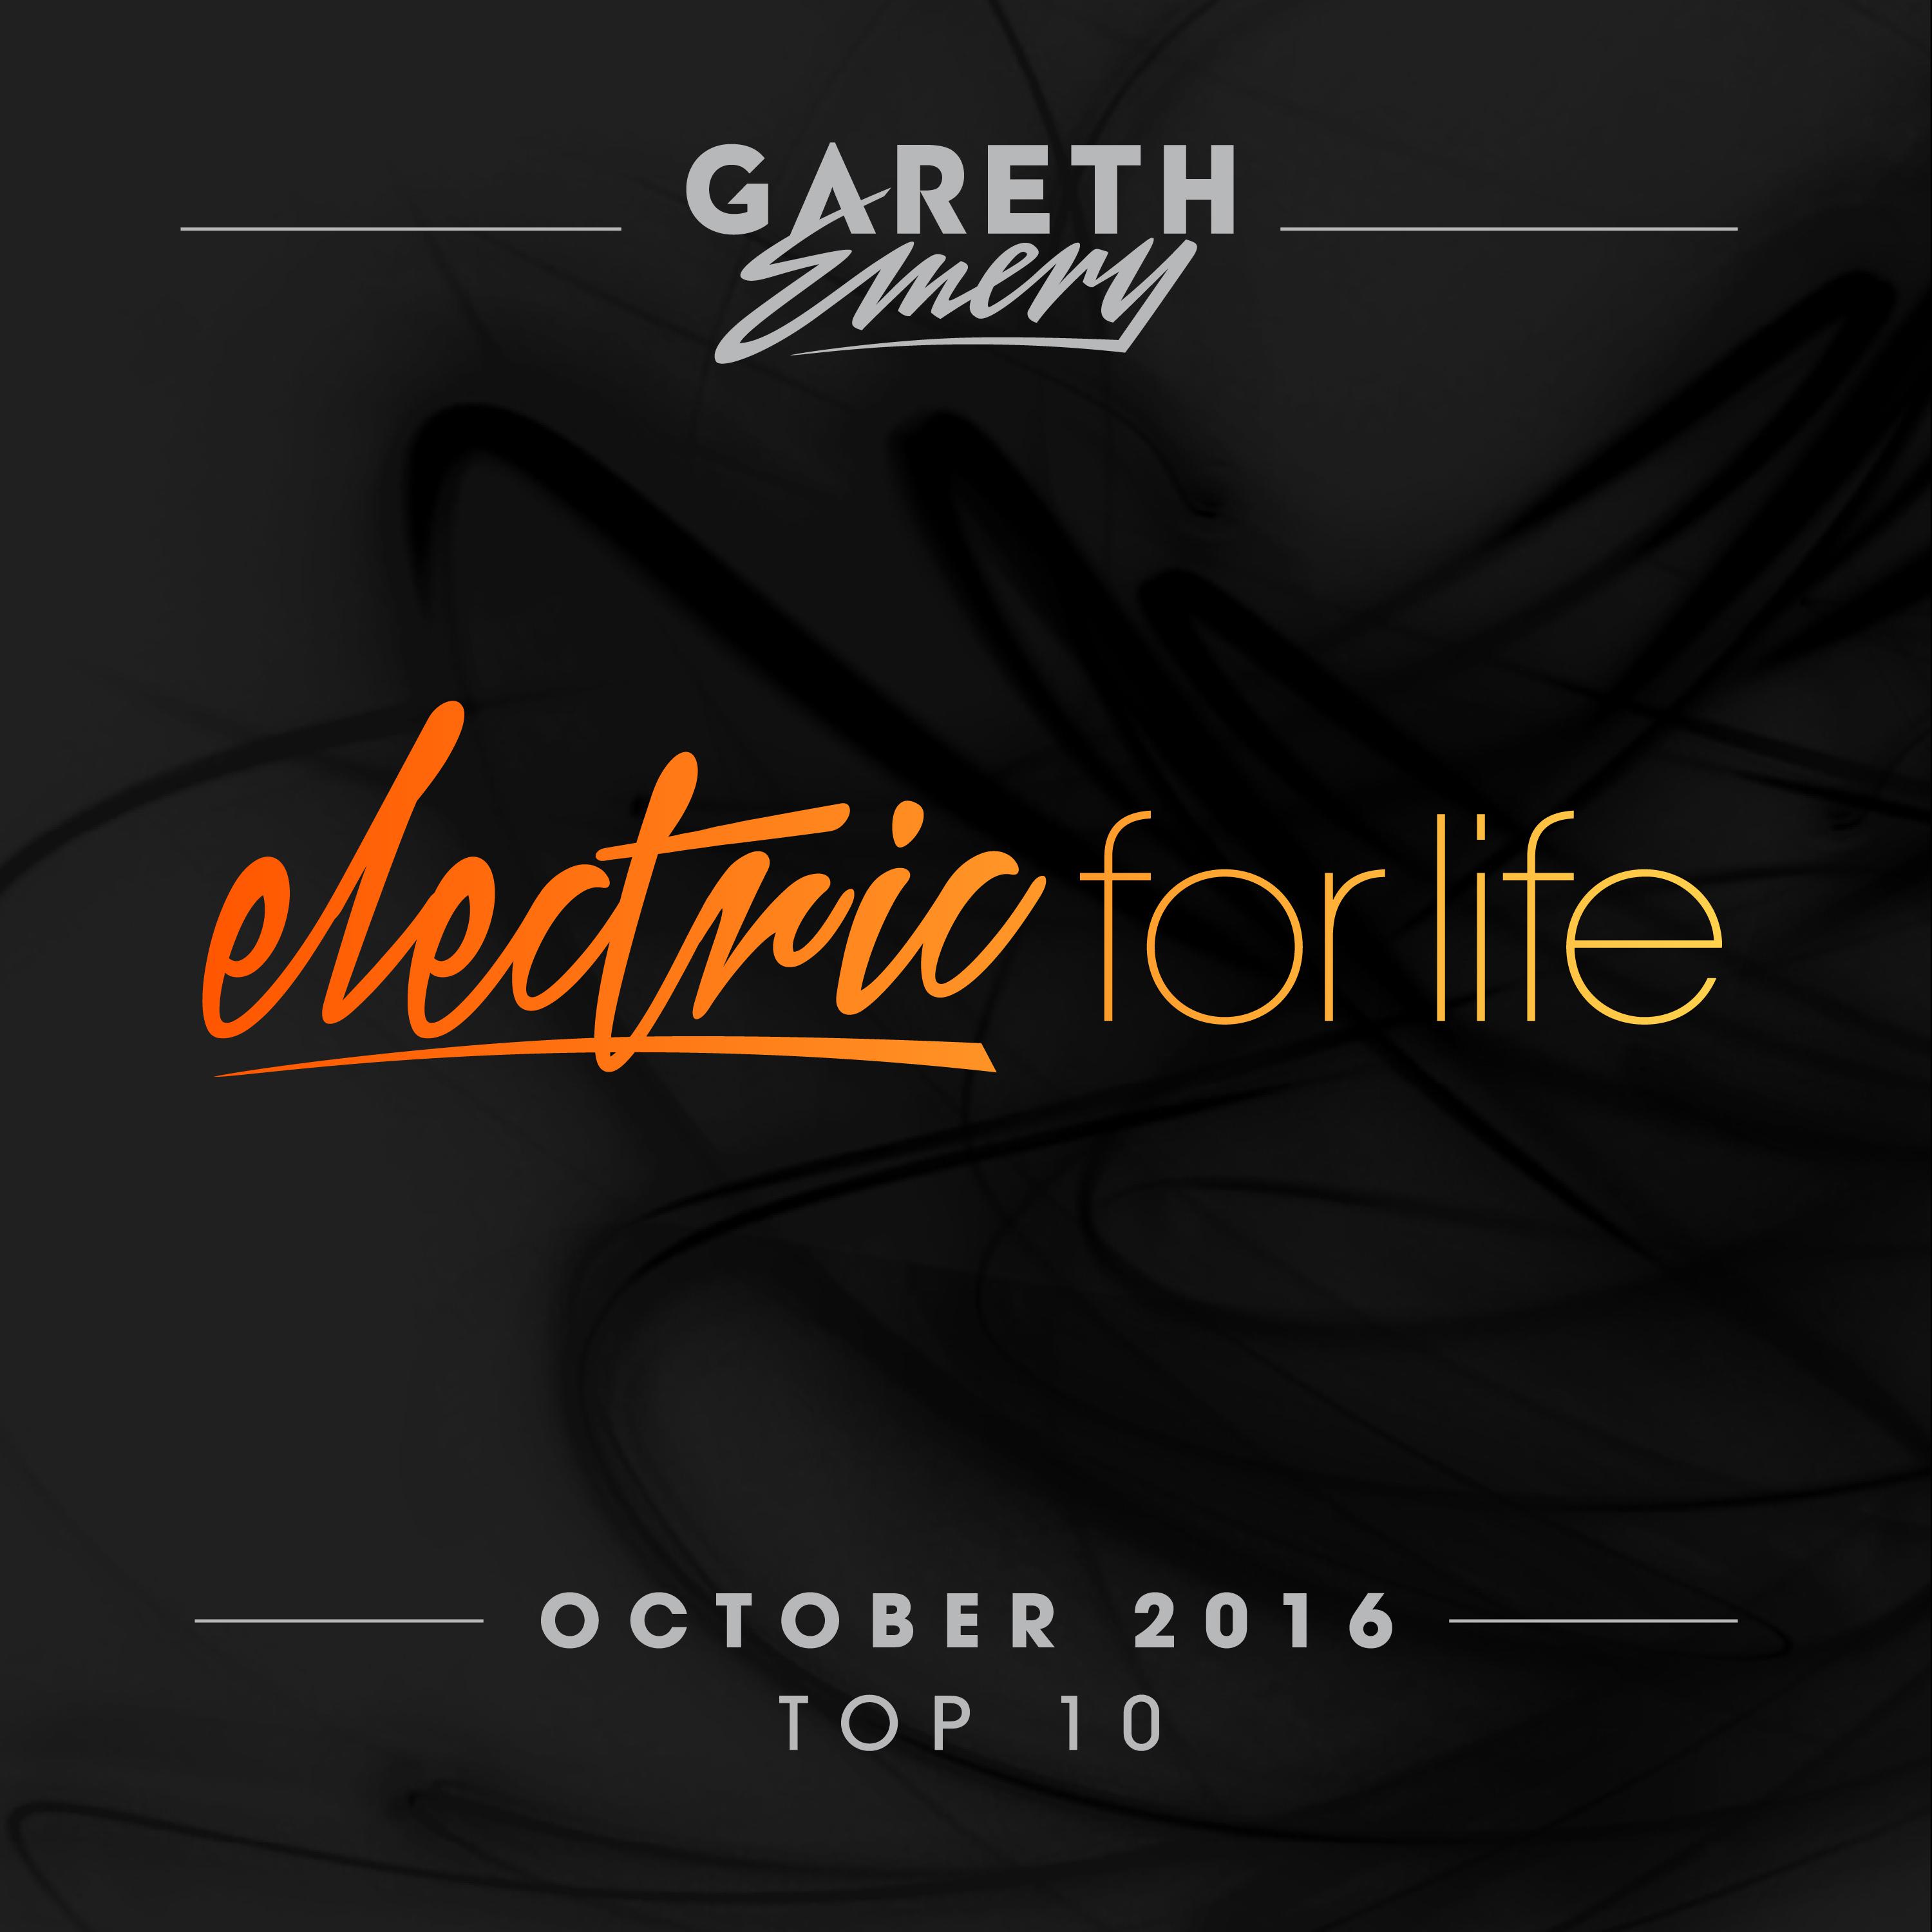 Electric For Life Top 10 - October 2016 (by Gareth Emery)专辑